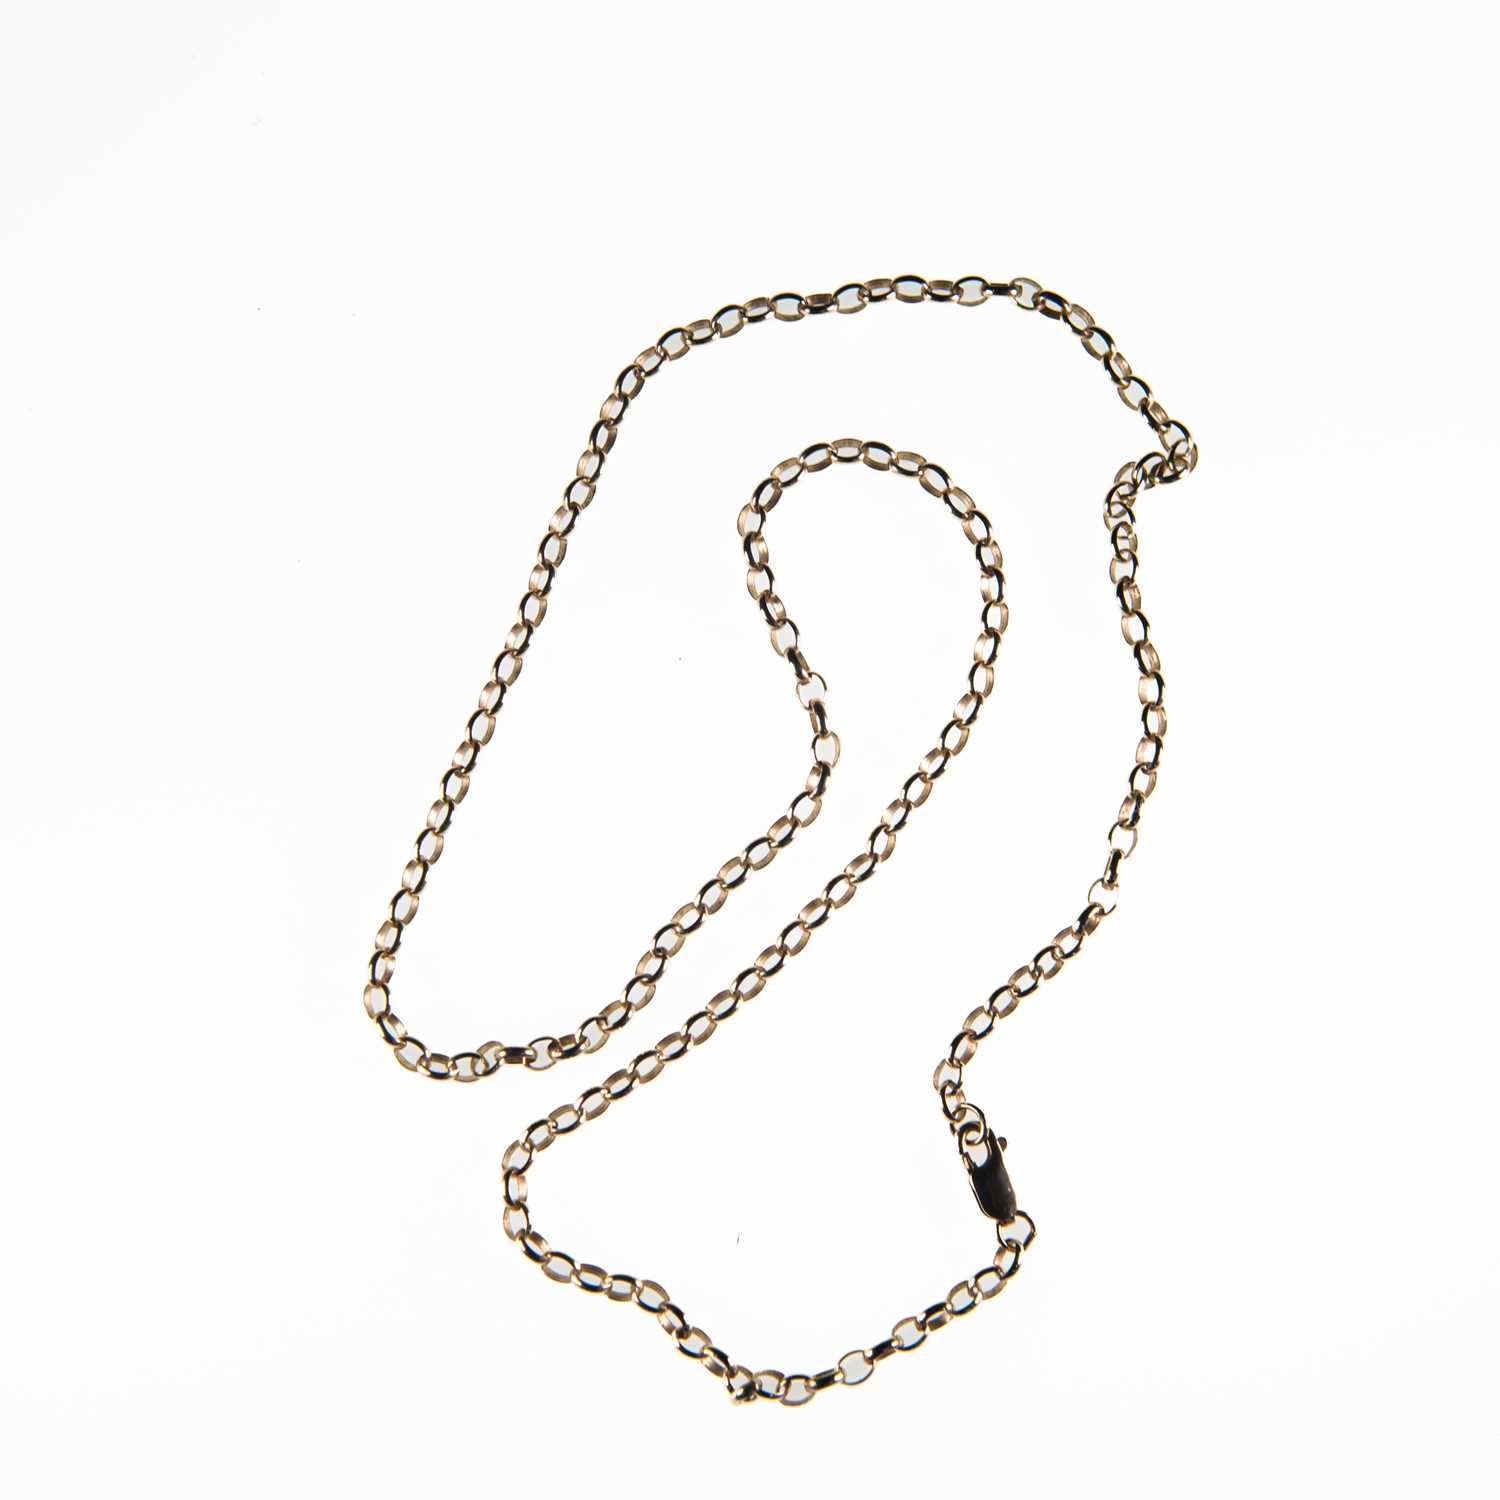 A 9 CARAT GOLD CHAIN NECKLACE